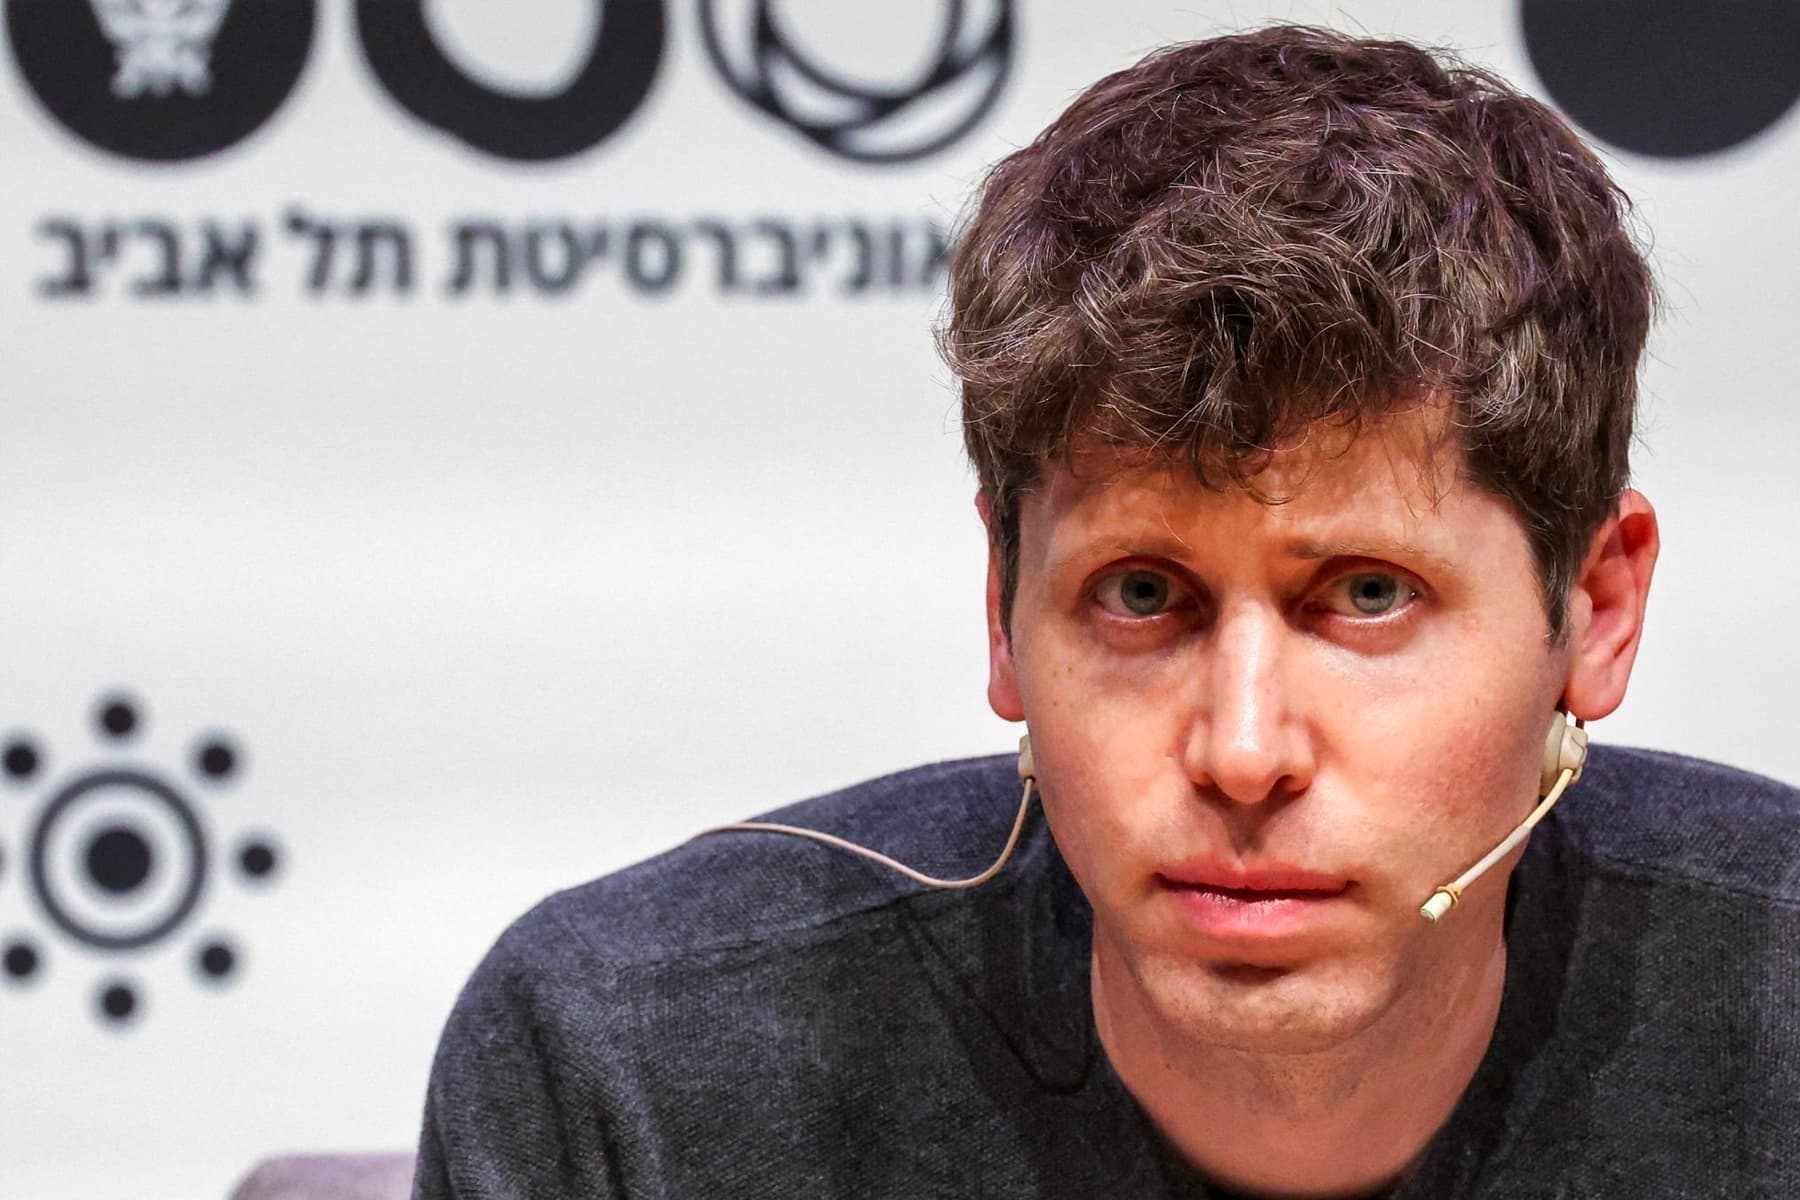 openai ceo sam altman worried press conference 64db3031c50aed6838dee5c0